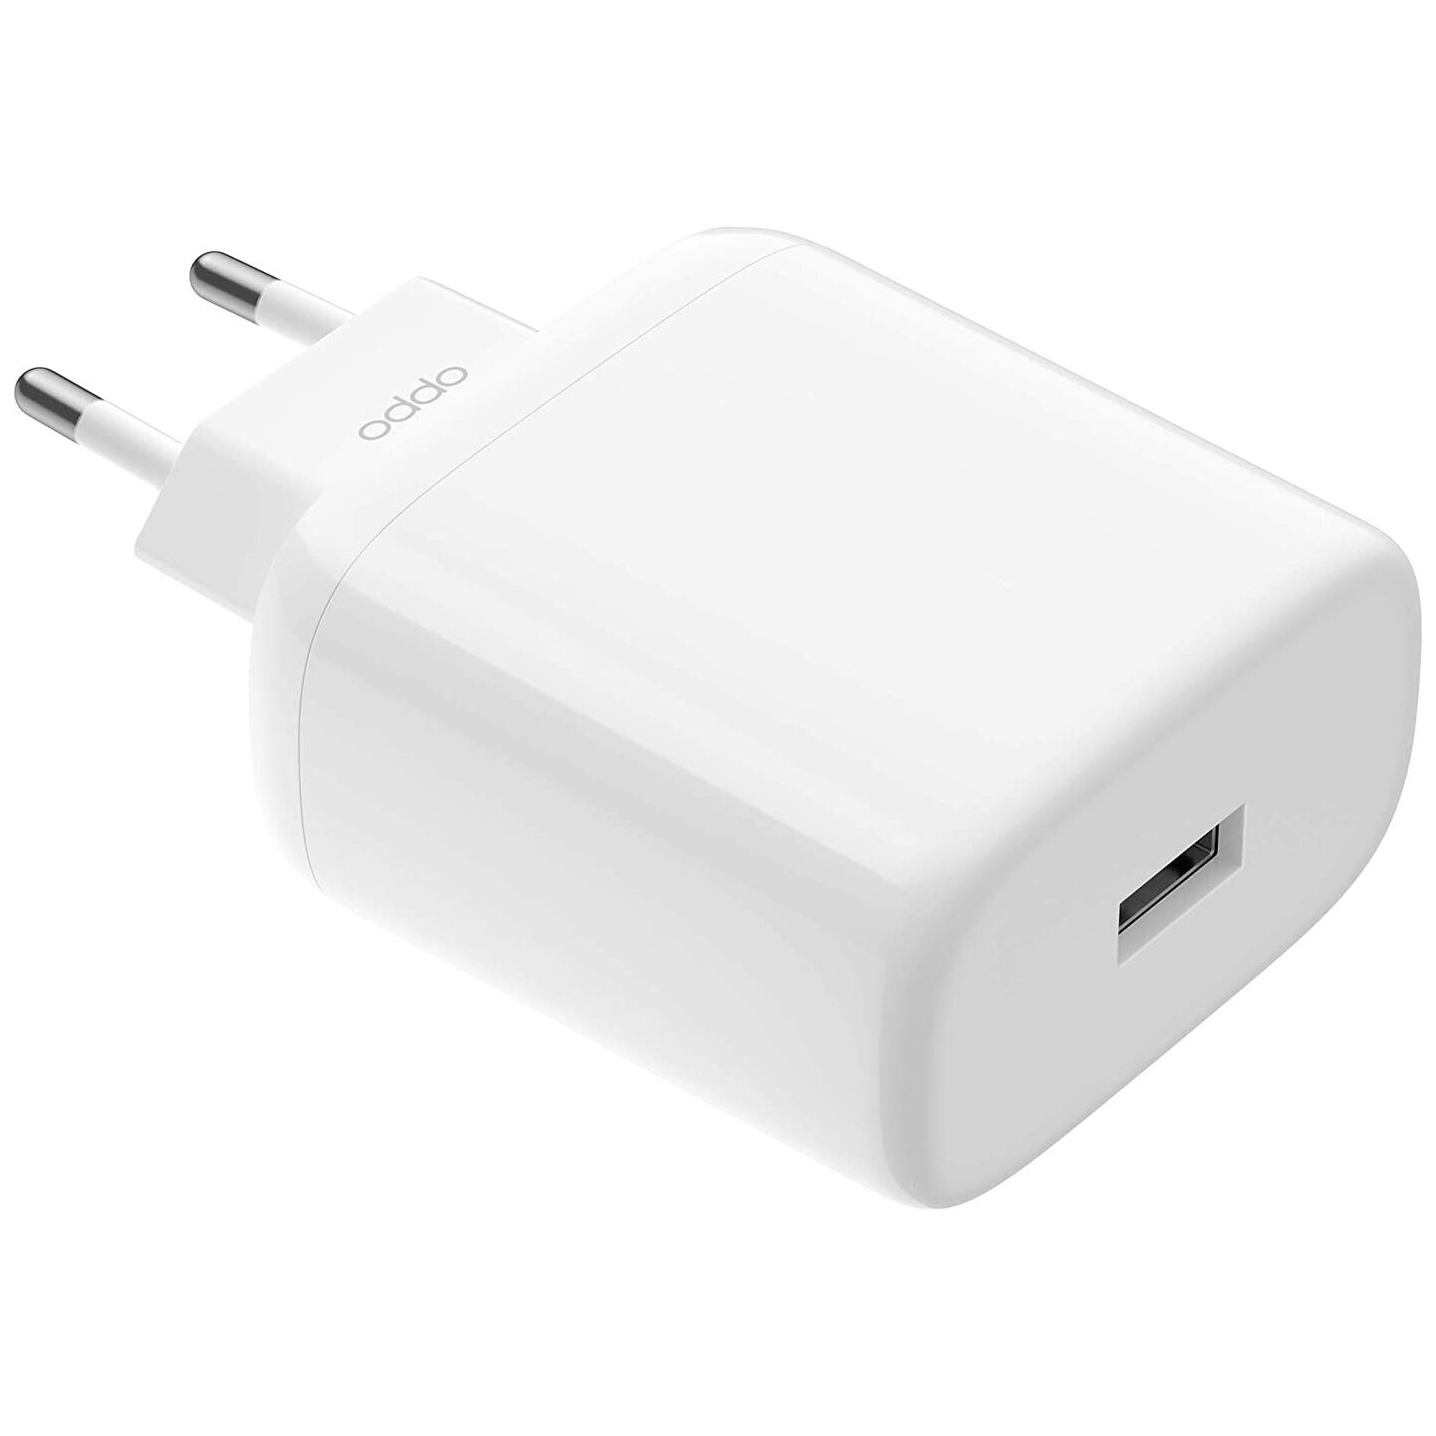 wall-charger-oppo-2C-quick-charge-2C-65w-2C-1x-usb-2C-white-5473963--28service-pack-29